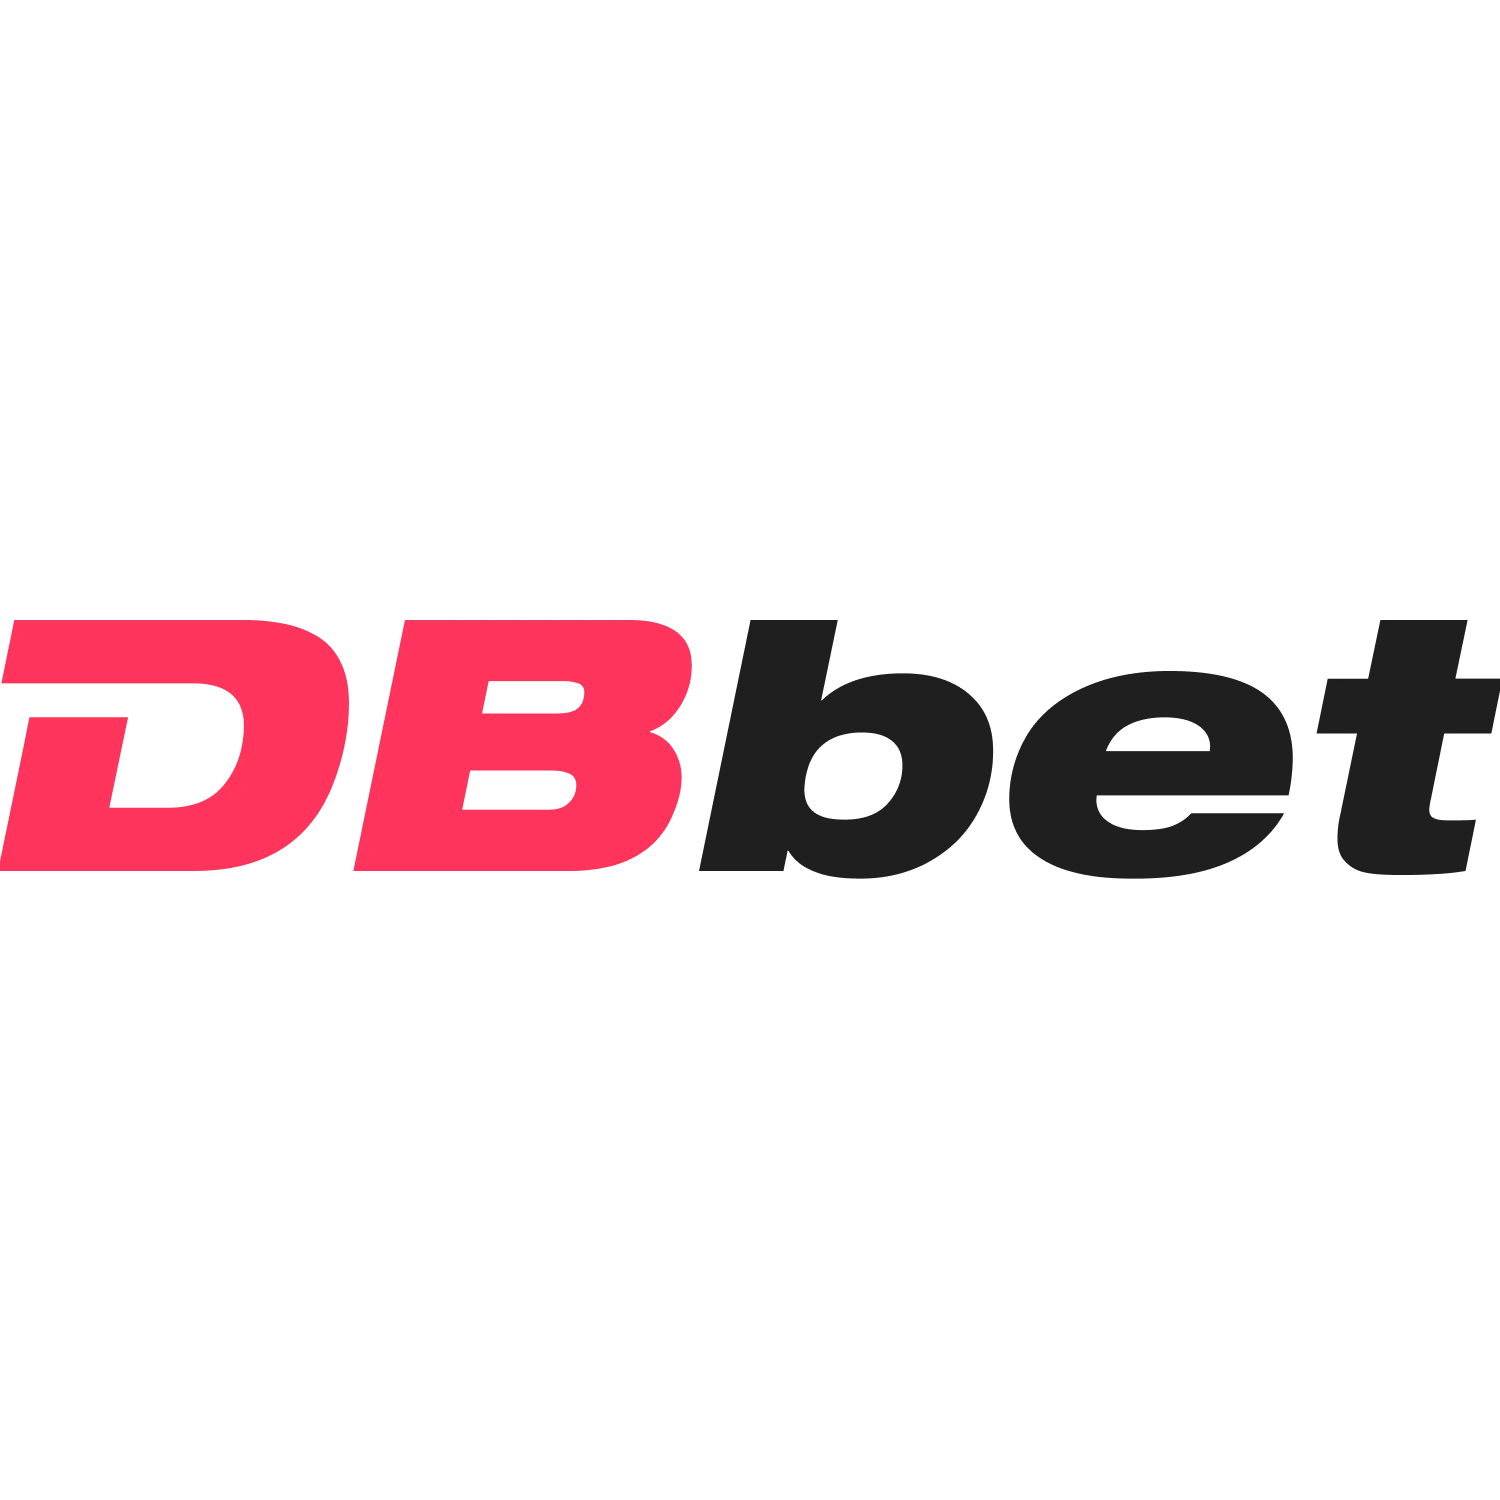 DBBet is legal and safe for players in India.